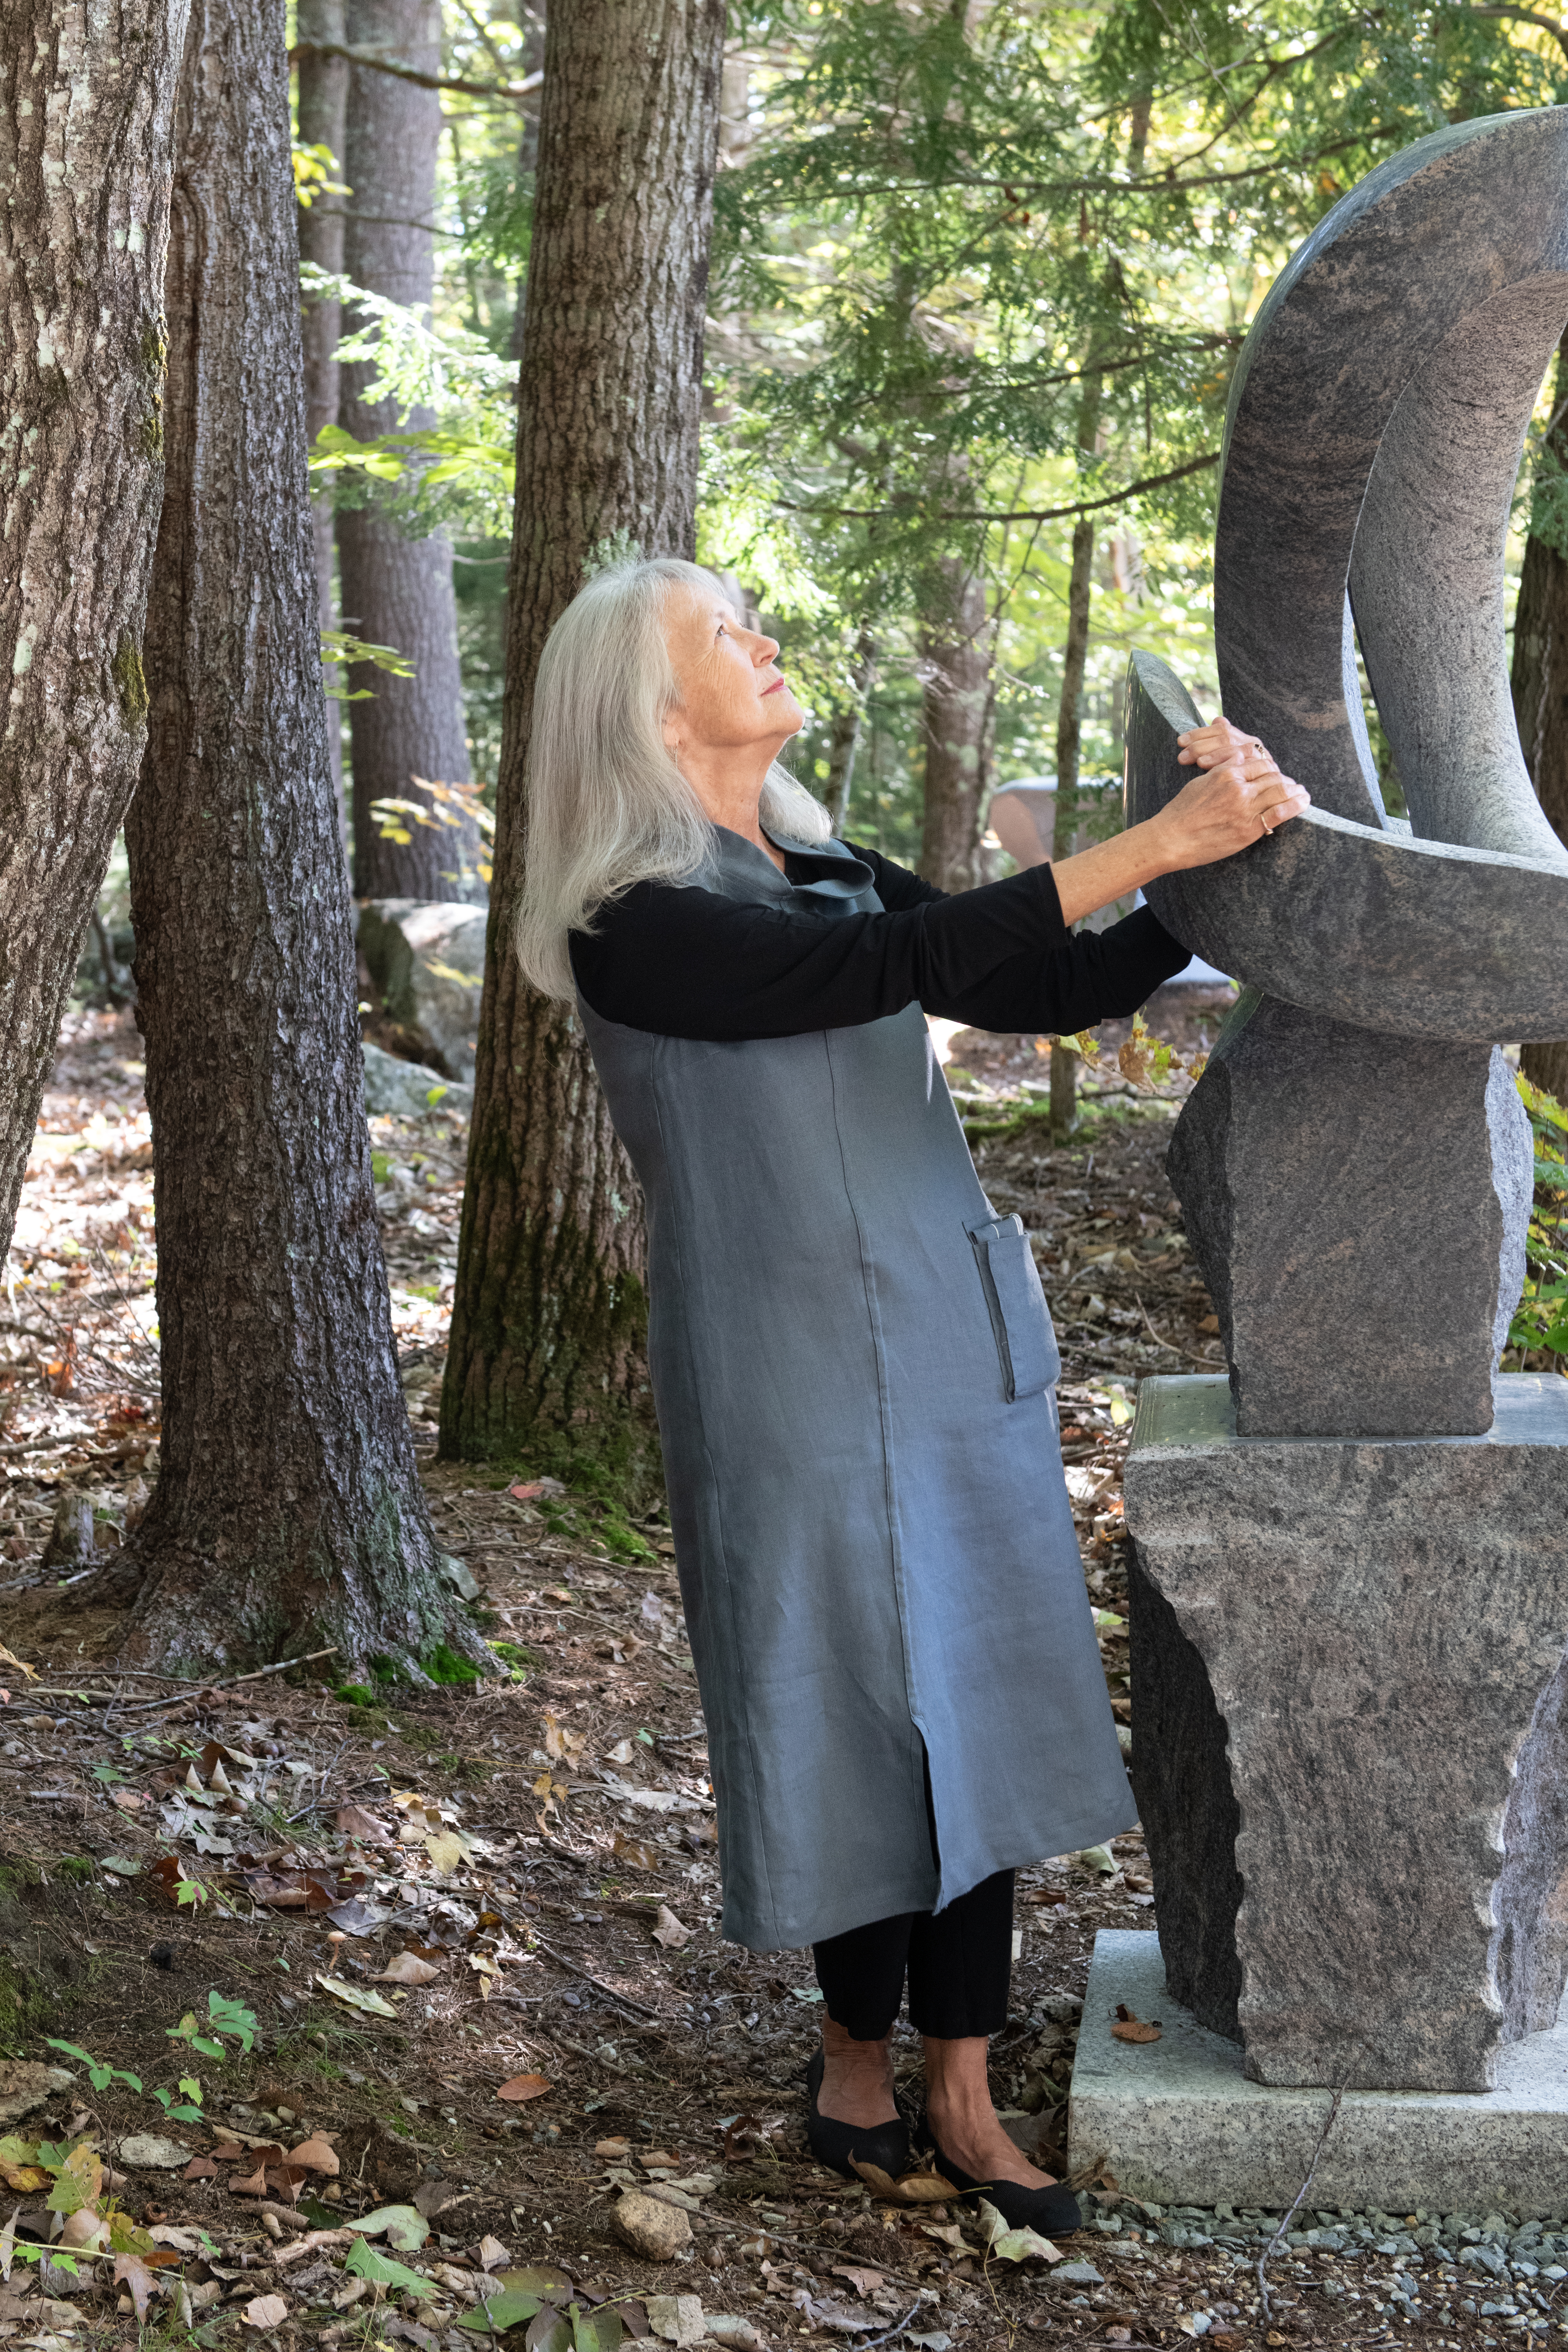 June, in the In Libris tunic, holding onto Miles Chapin’s granite sculpture “Bloom”